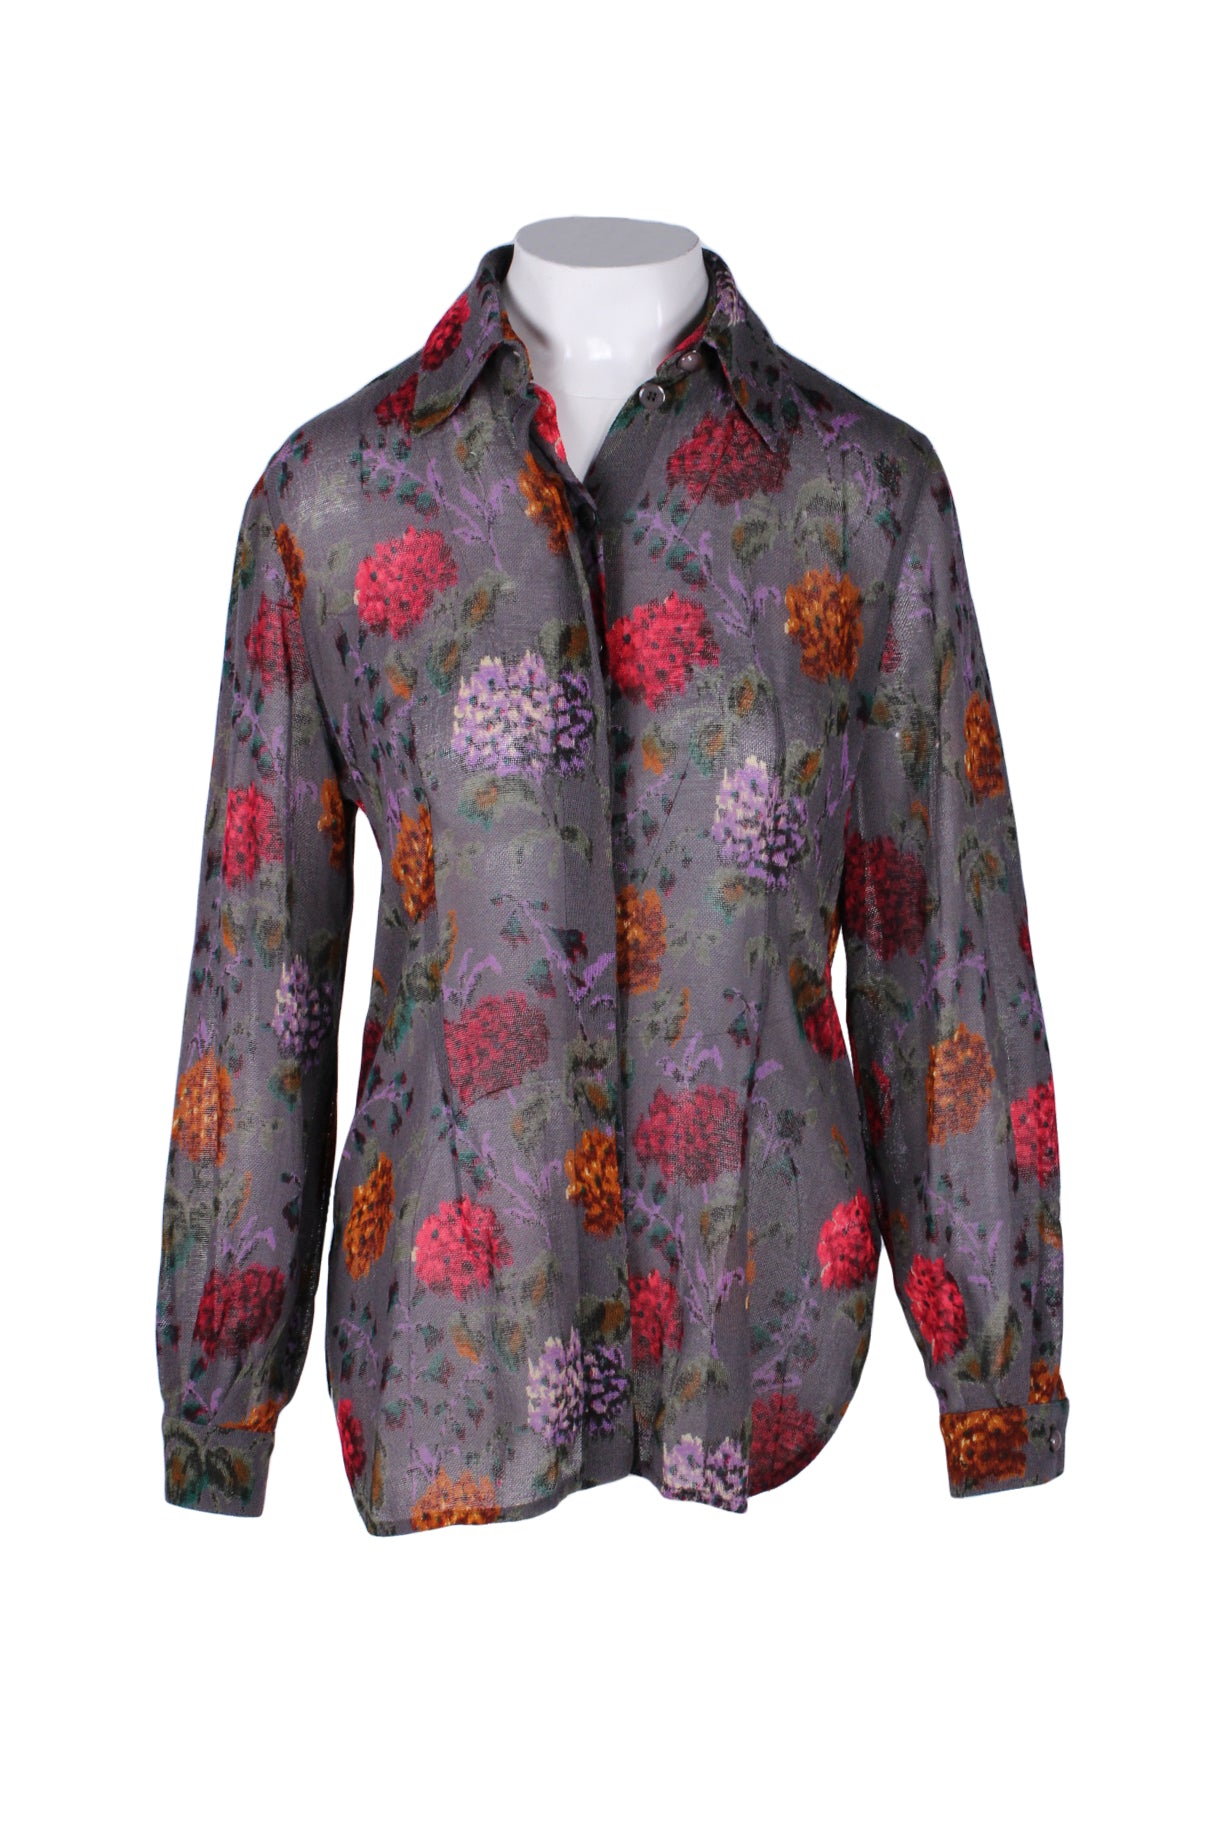 front angle of vintage ungaro grey purple floral long sleeve button up shirt. features sheer wide weave throughout, elongated pointed collar, buttoned cuffs and covered button closure up center.